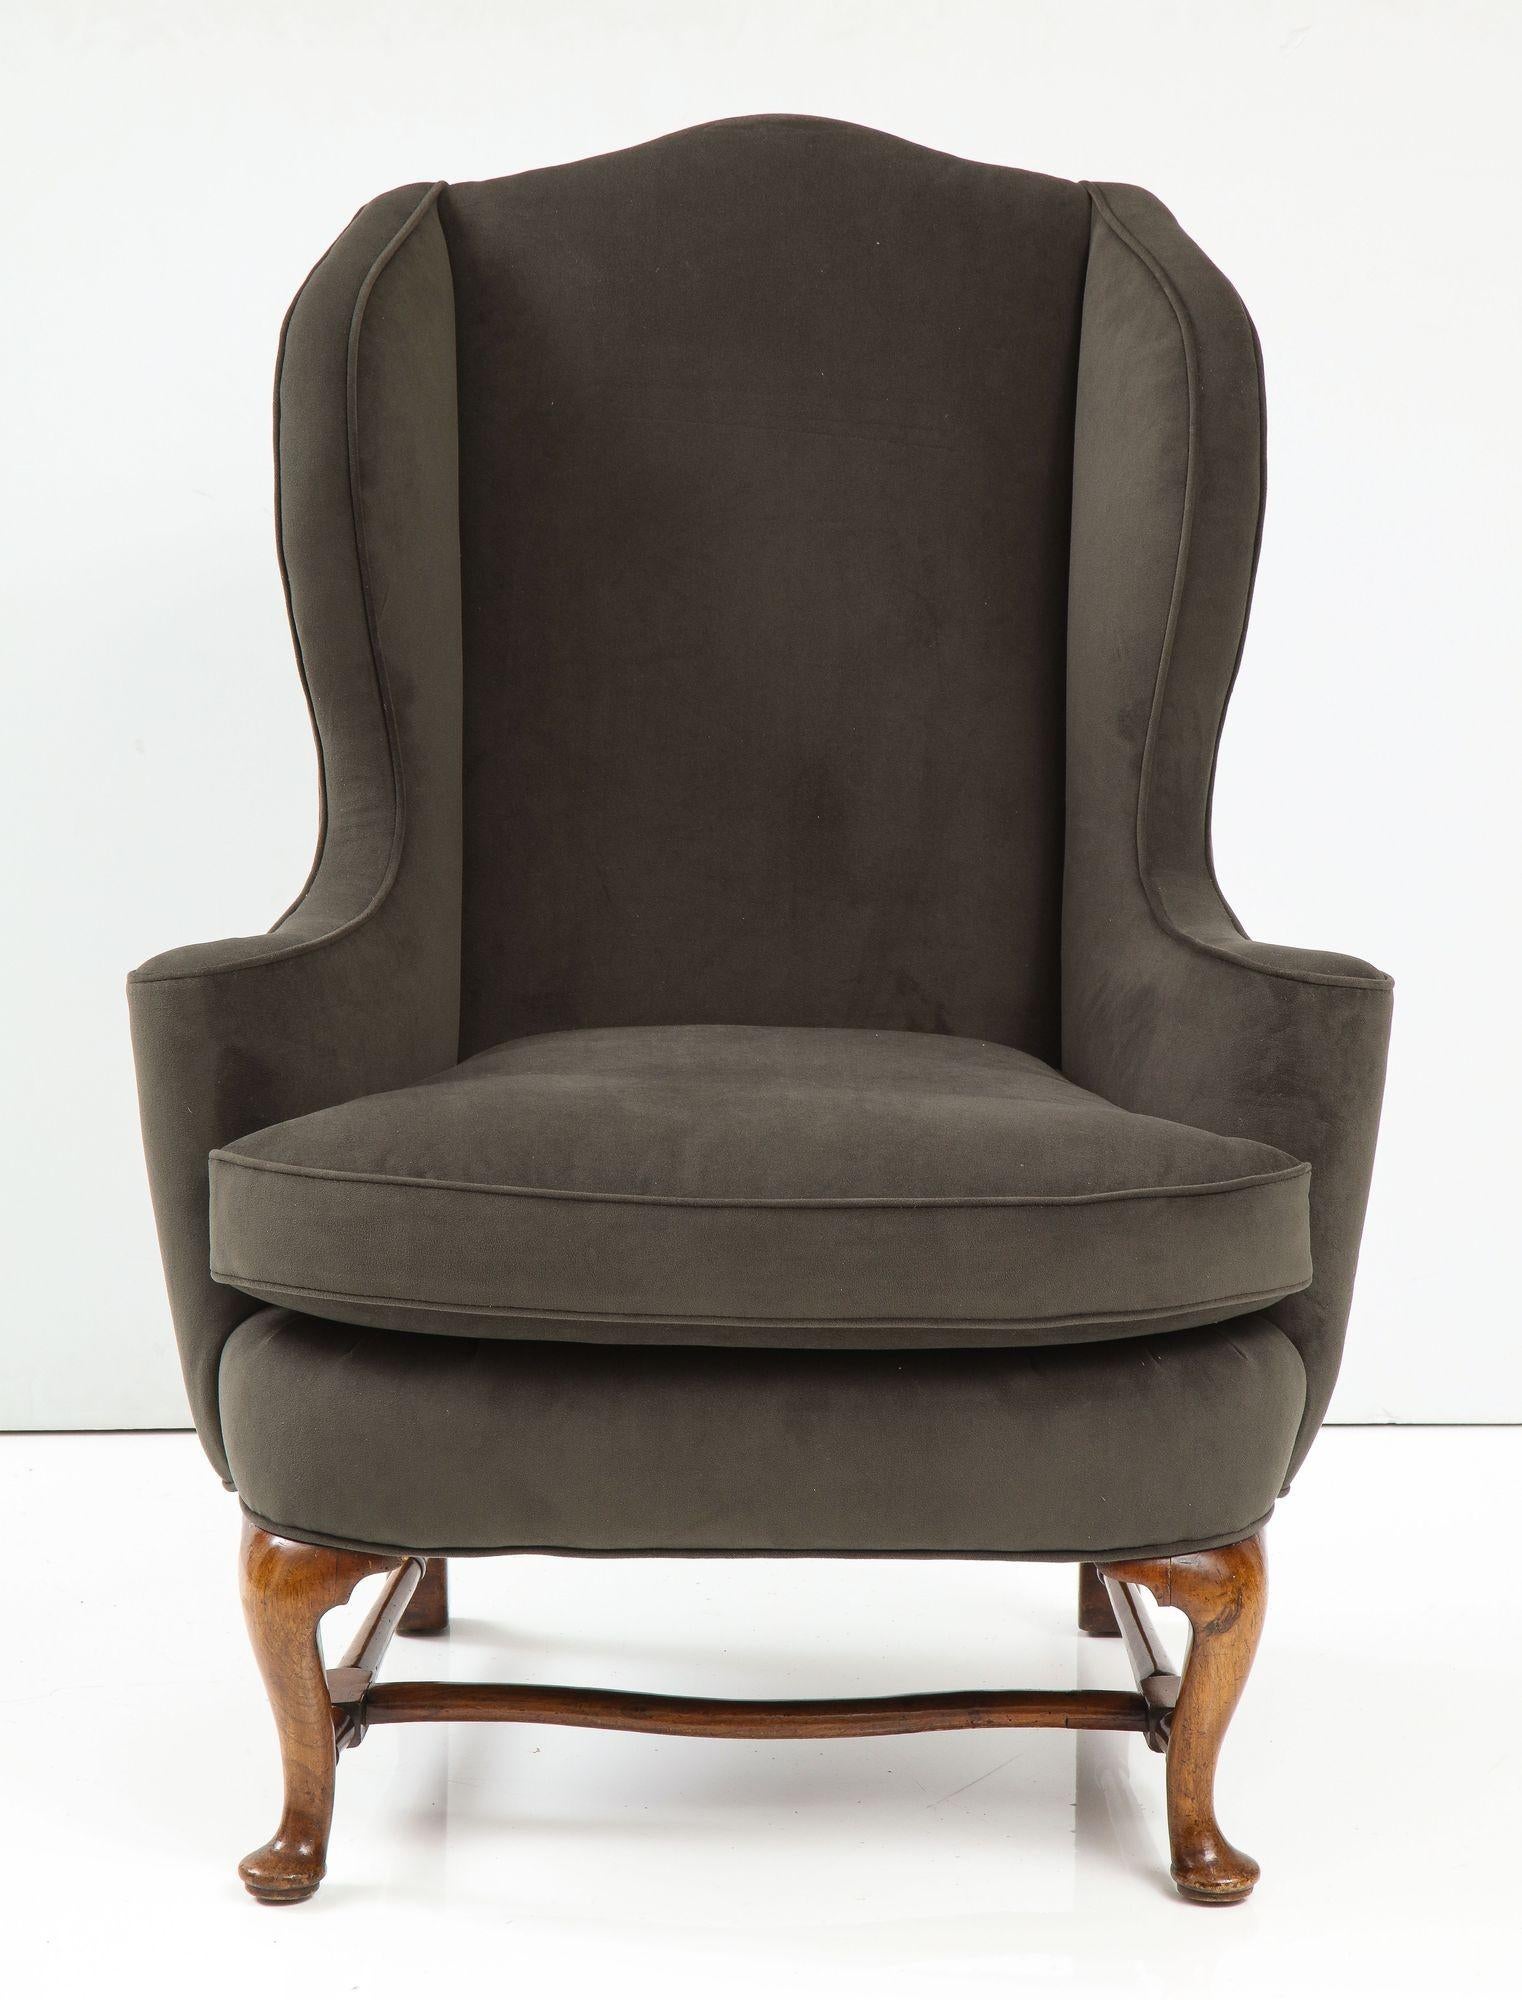 Fine George I walnut wing armchair of elegant proportions, the arched back over shaped sides and outrolled arms and standing on cabriole legs joined by turned stretchers front to back with medial shaped stretcher, possessing good rich color and